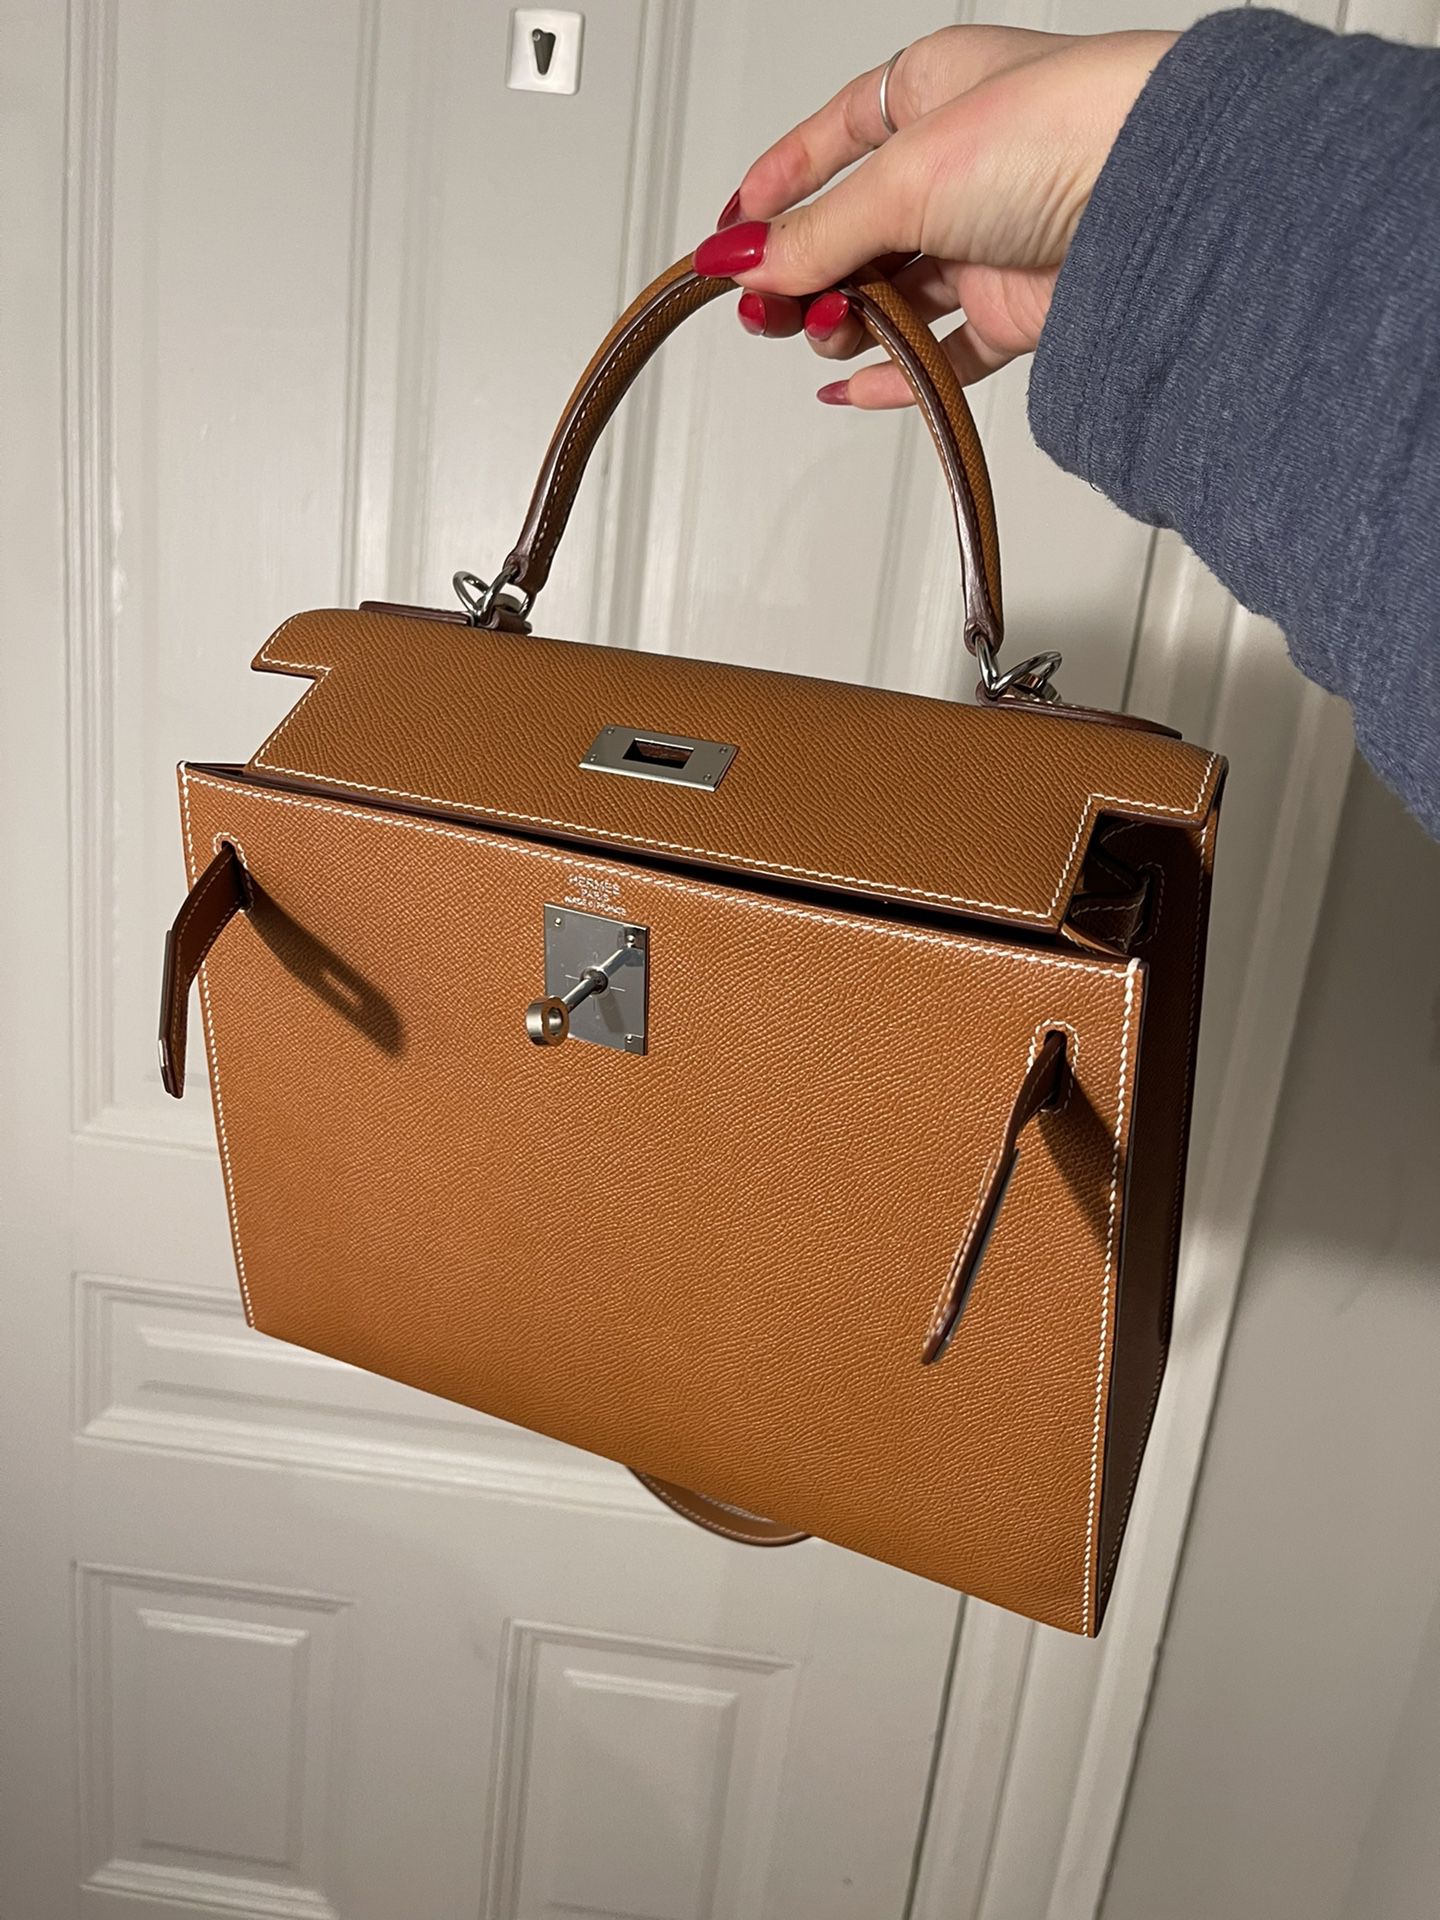 Hermes Kelly gold 28 silver hardware for Sale in San Francisco, CA